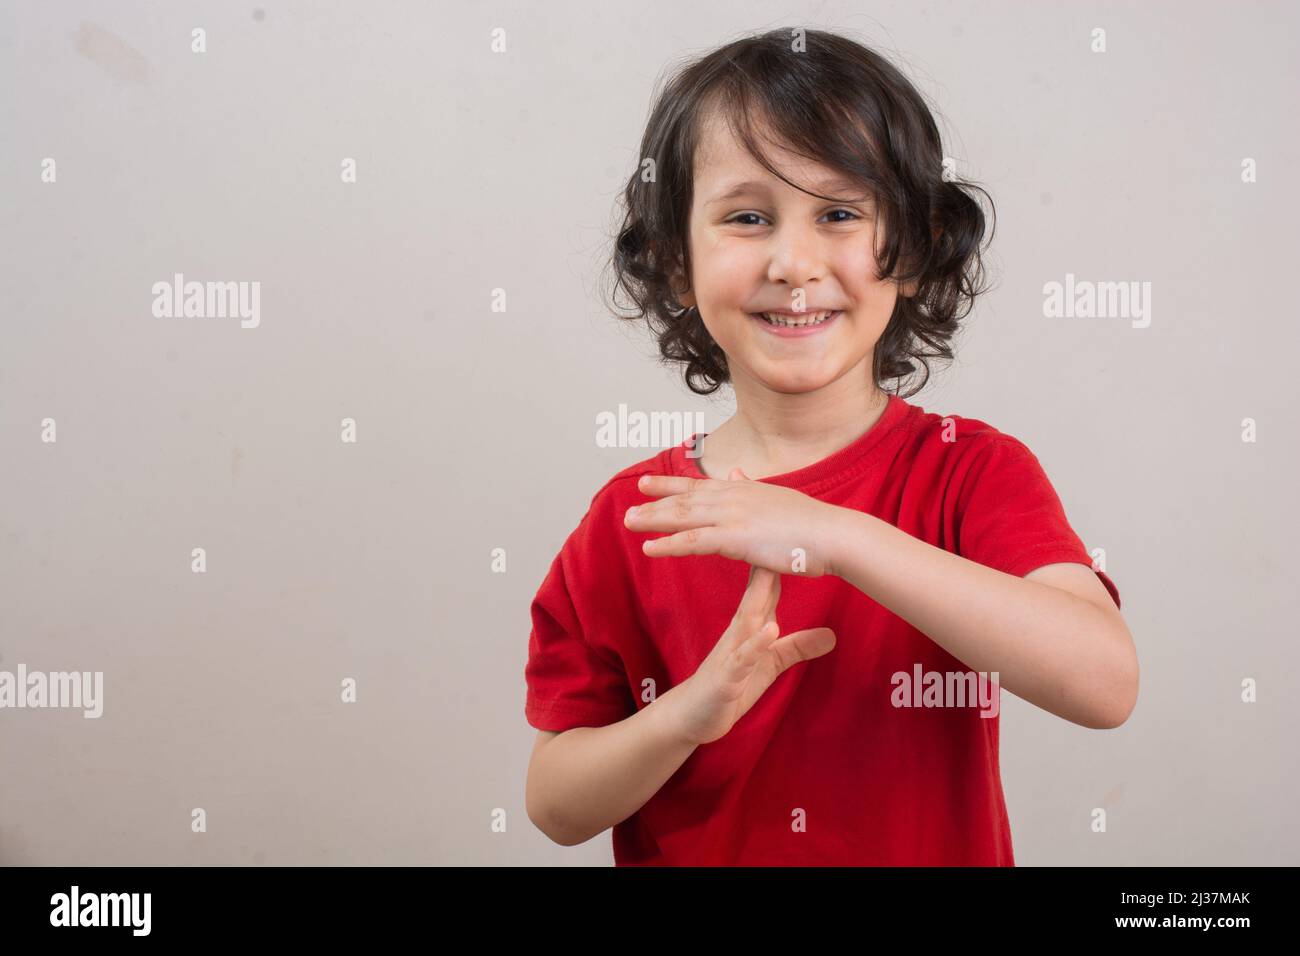 Smiling little boy making a pause or break time hand gesture. Stock Photo